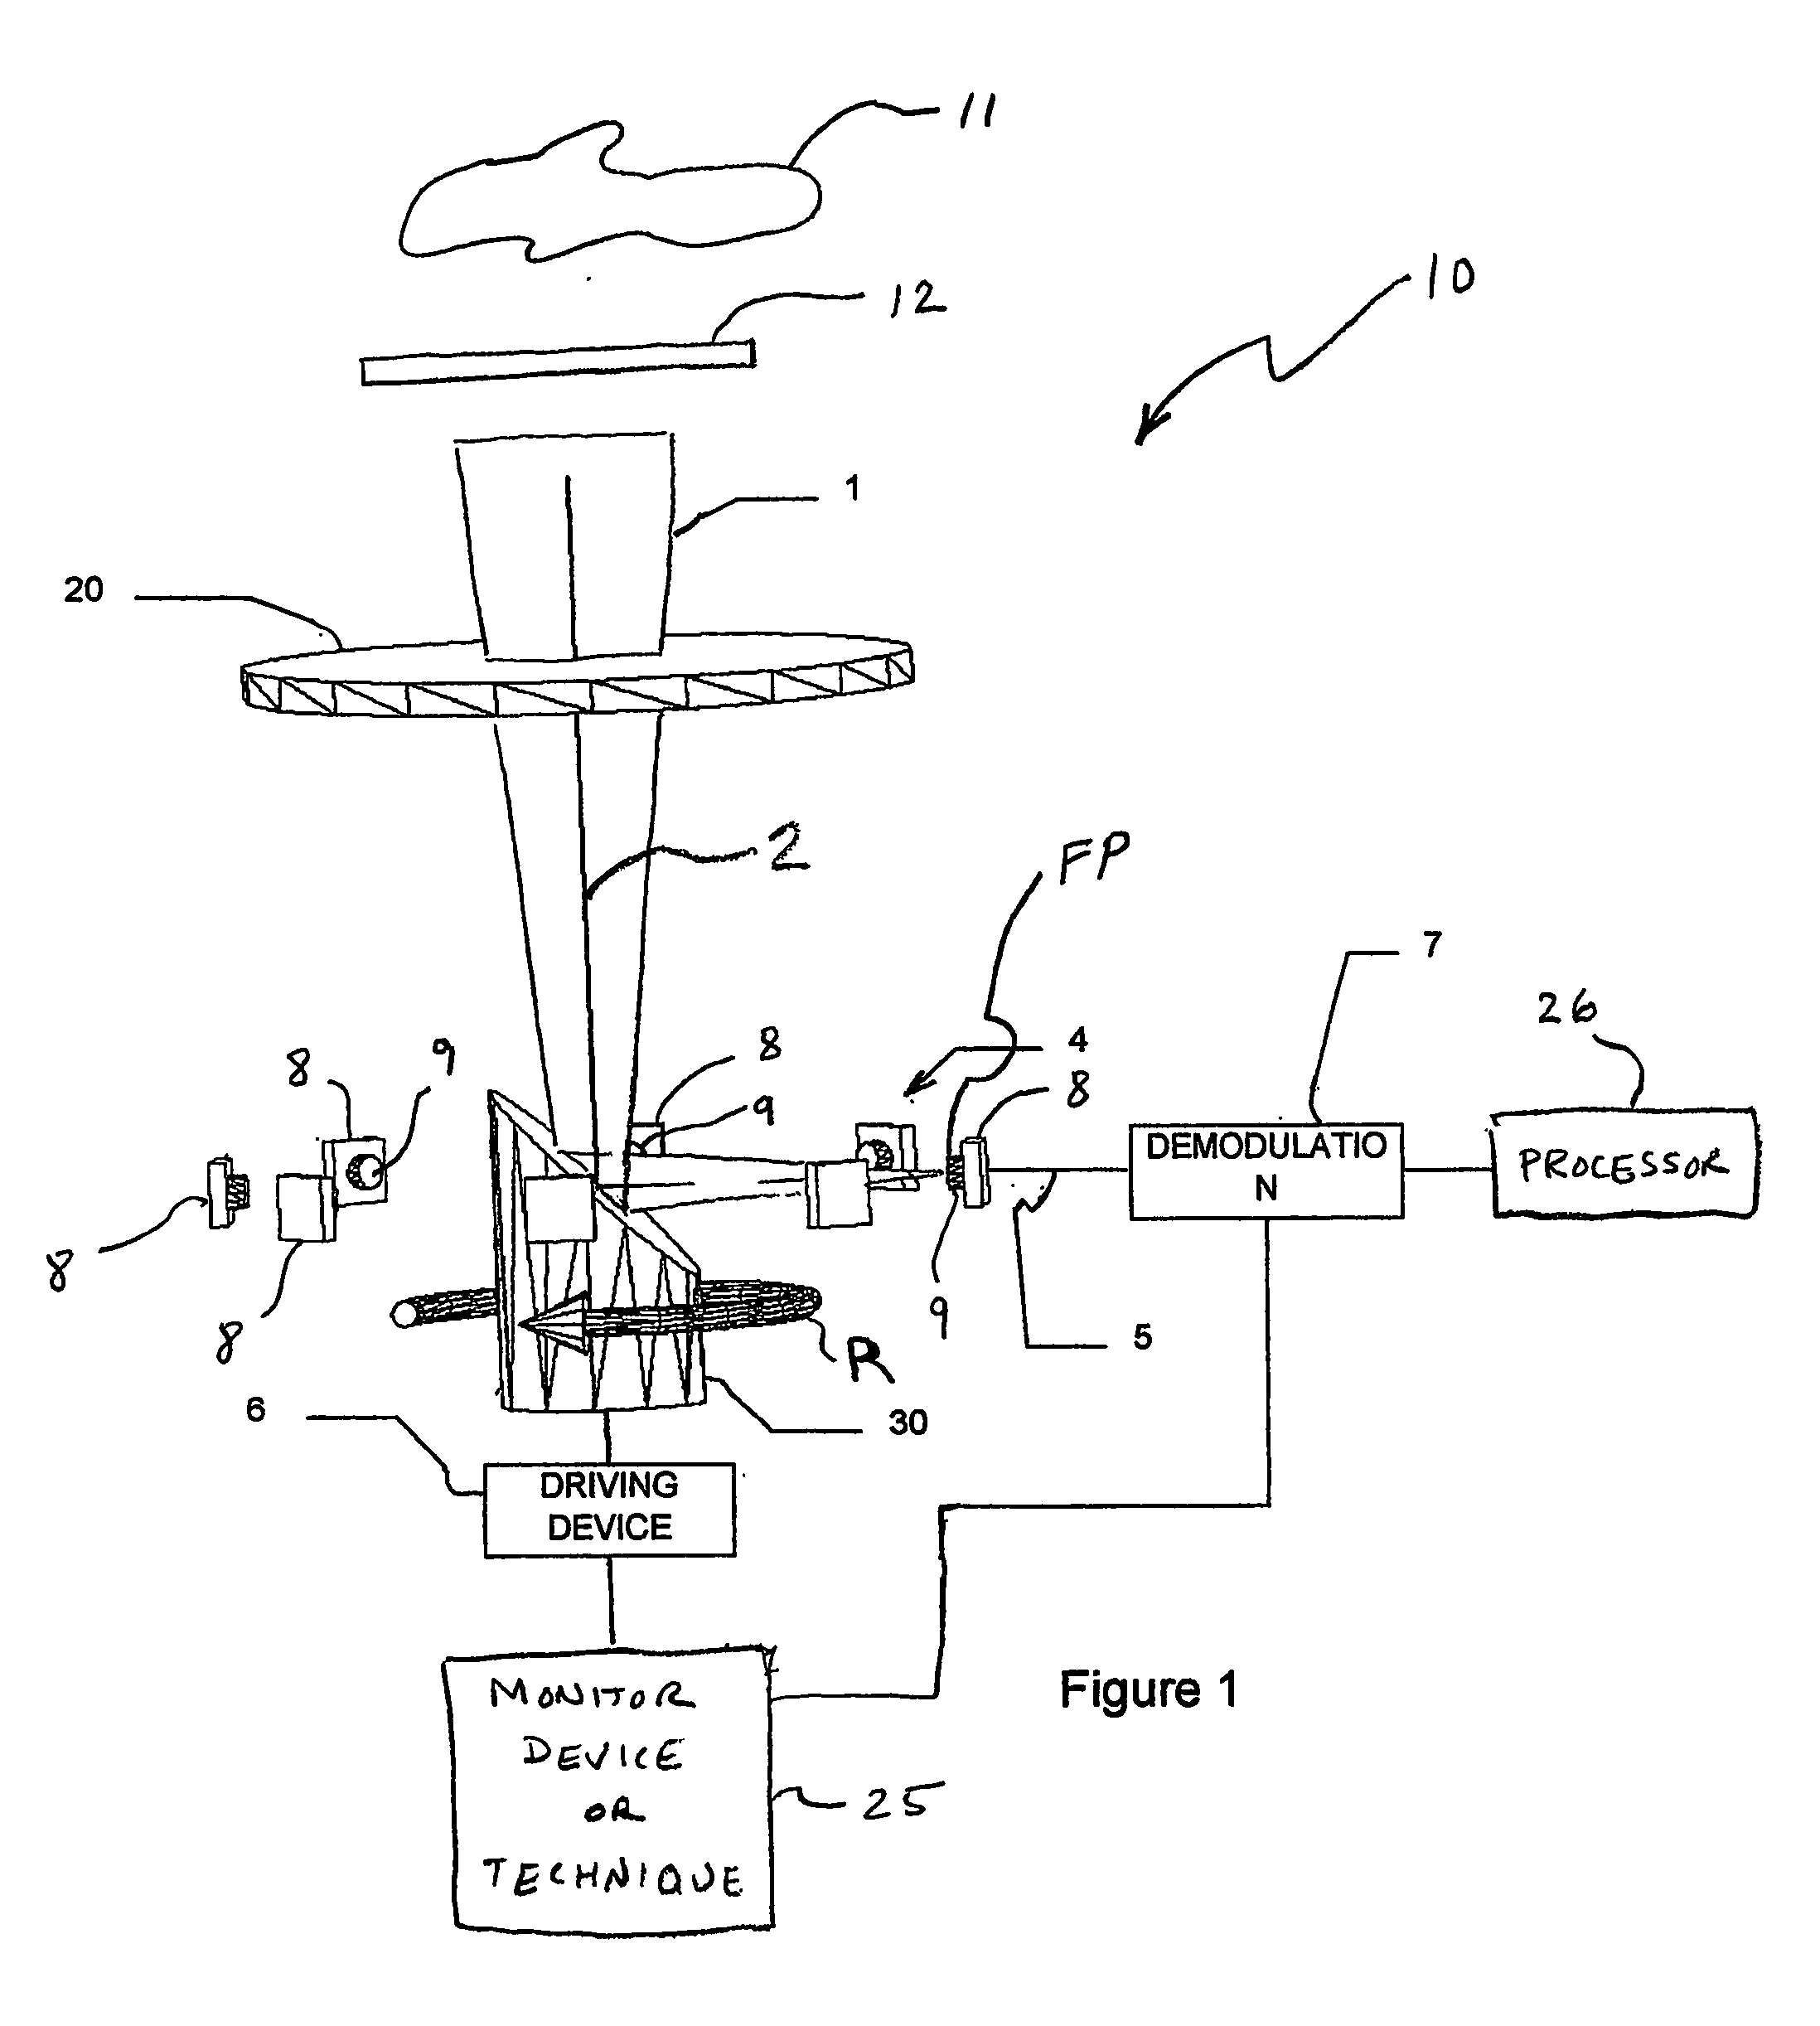 System and method for remote sensing and/or analyzing spectral properties of targets and/or chemical speicies for detection and identification thereof